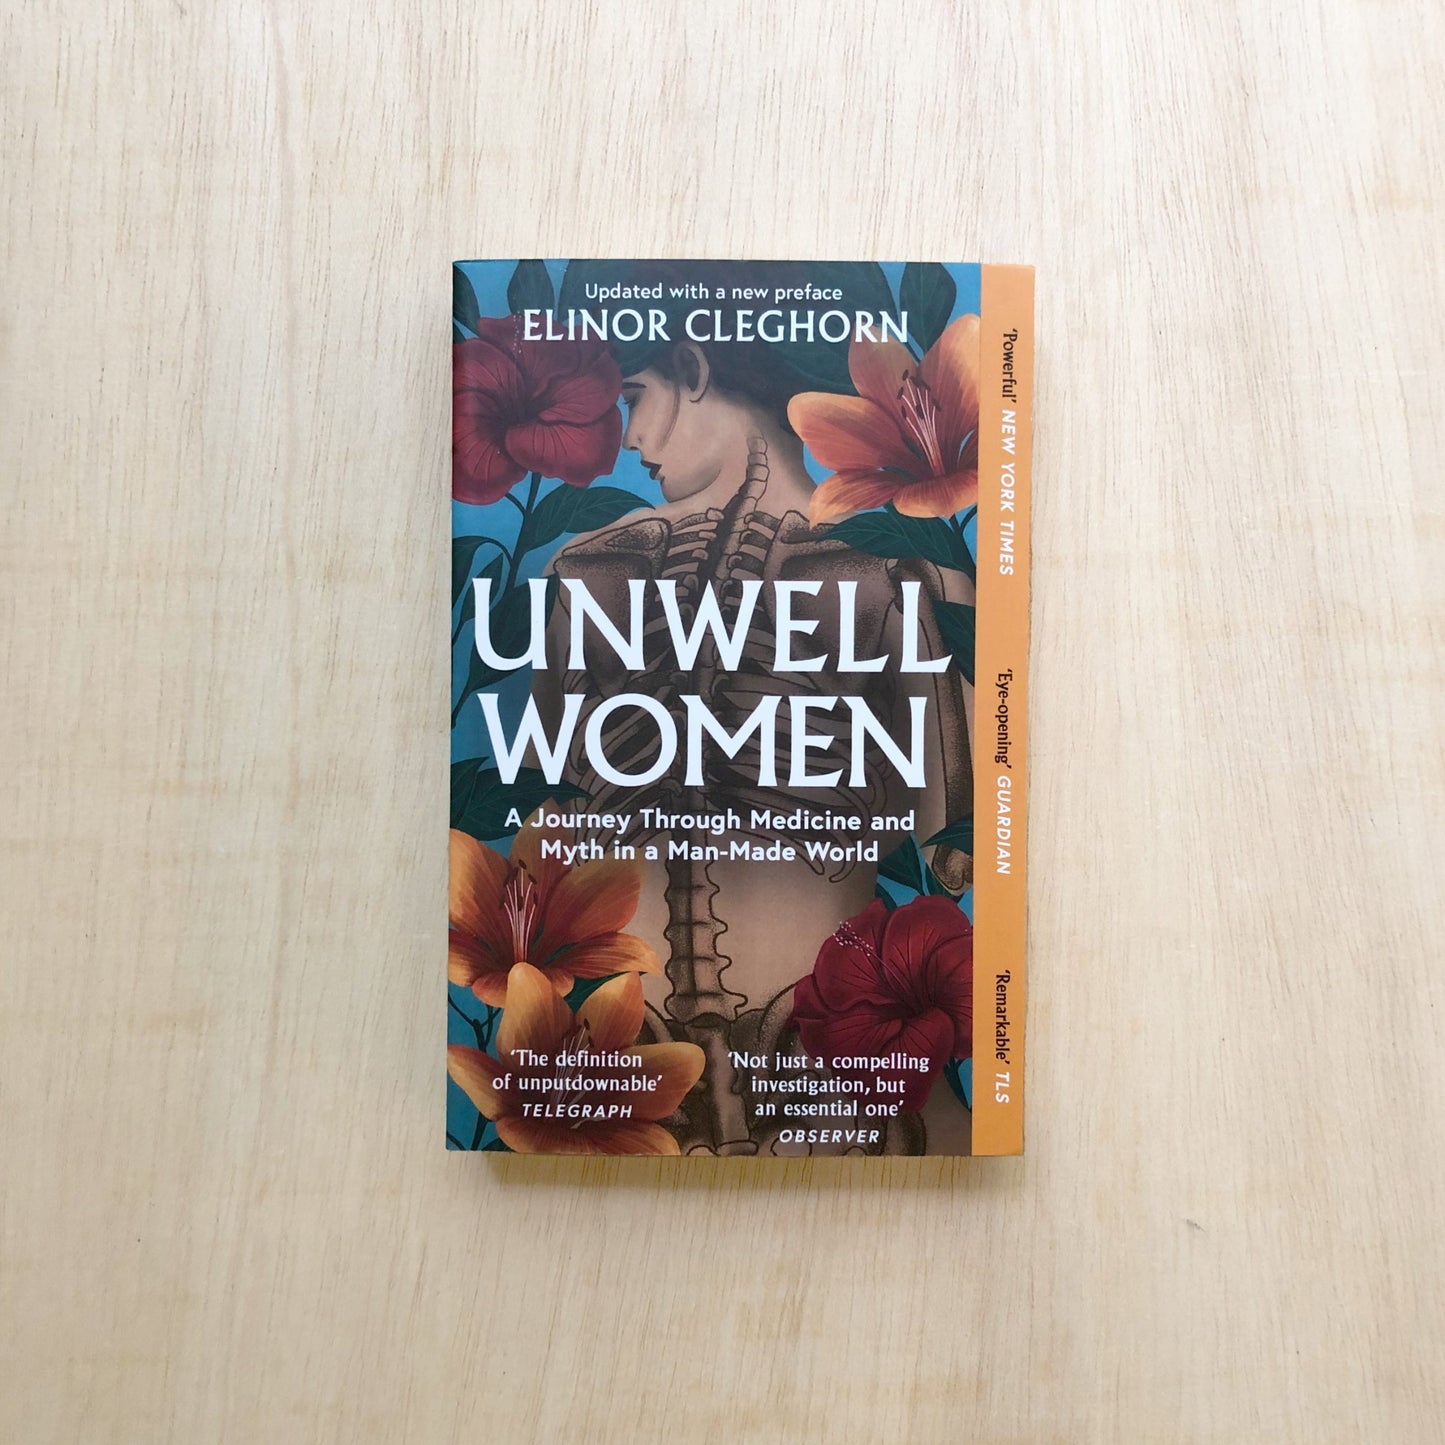 Unwell Women: A Journey Through Medicine and Myth in a Man-Made